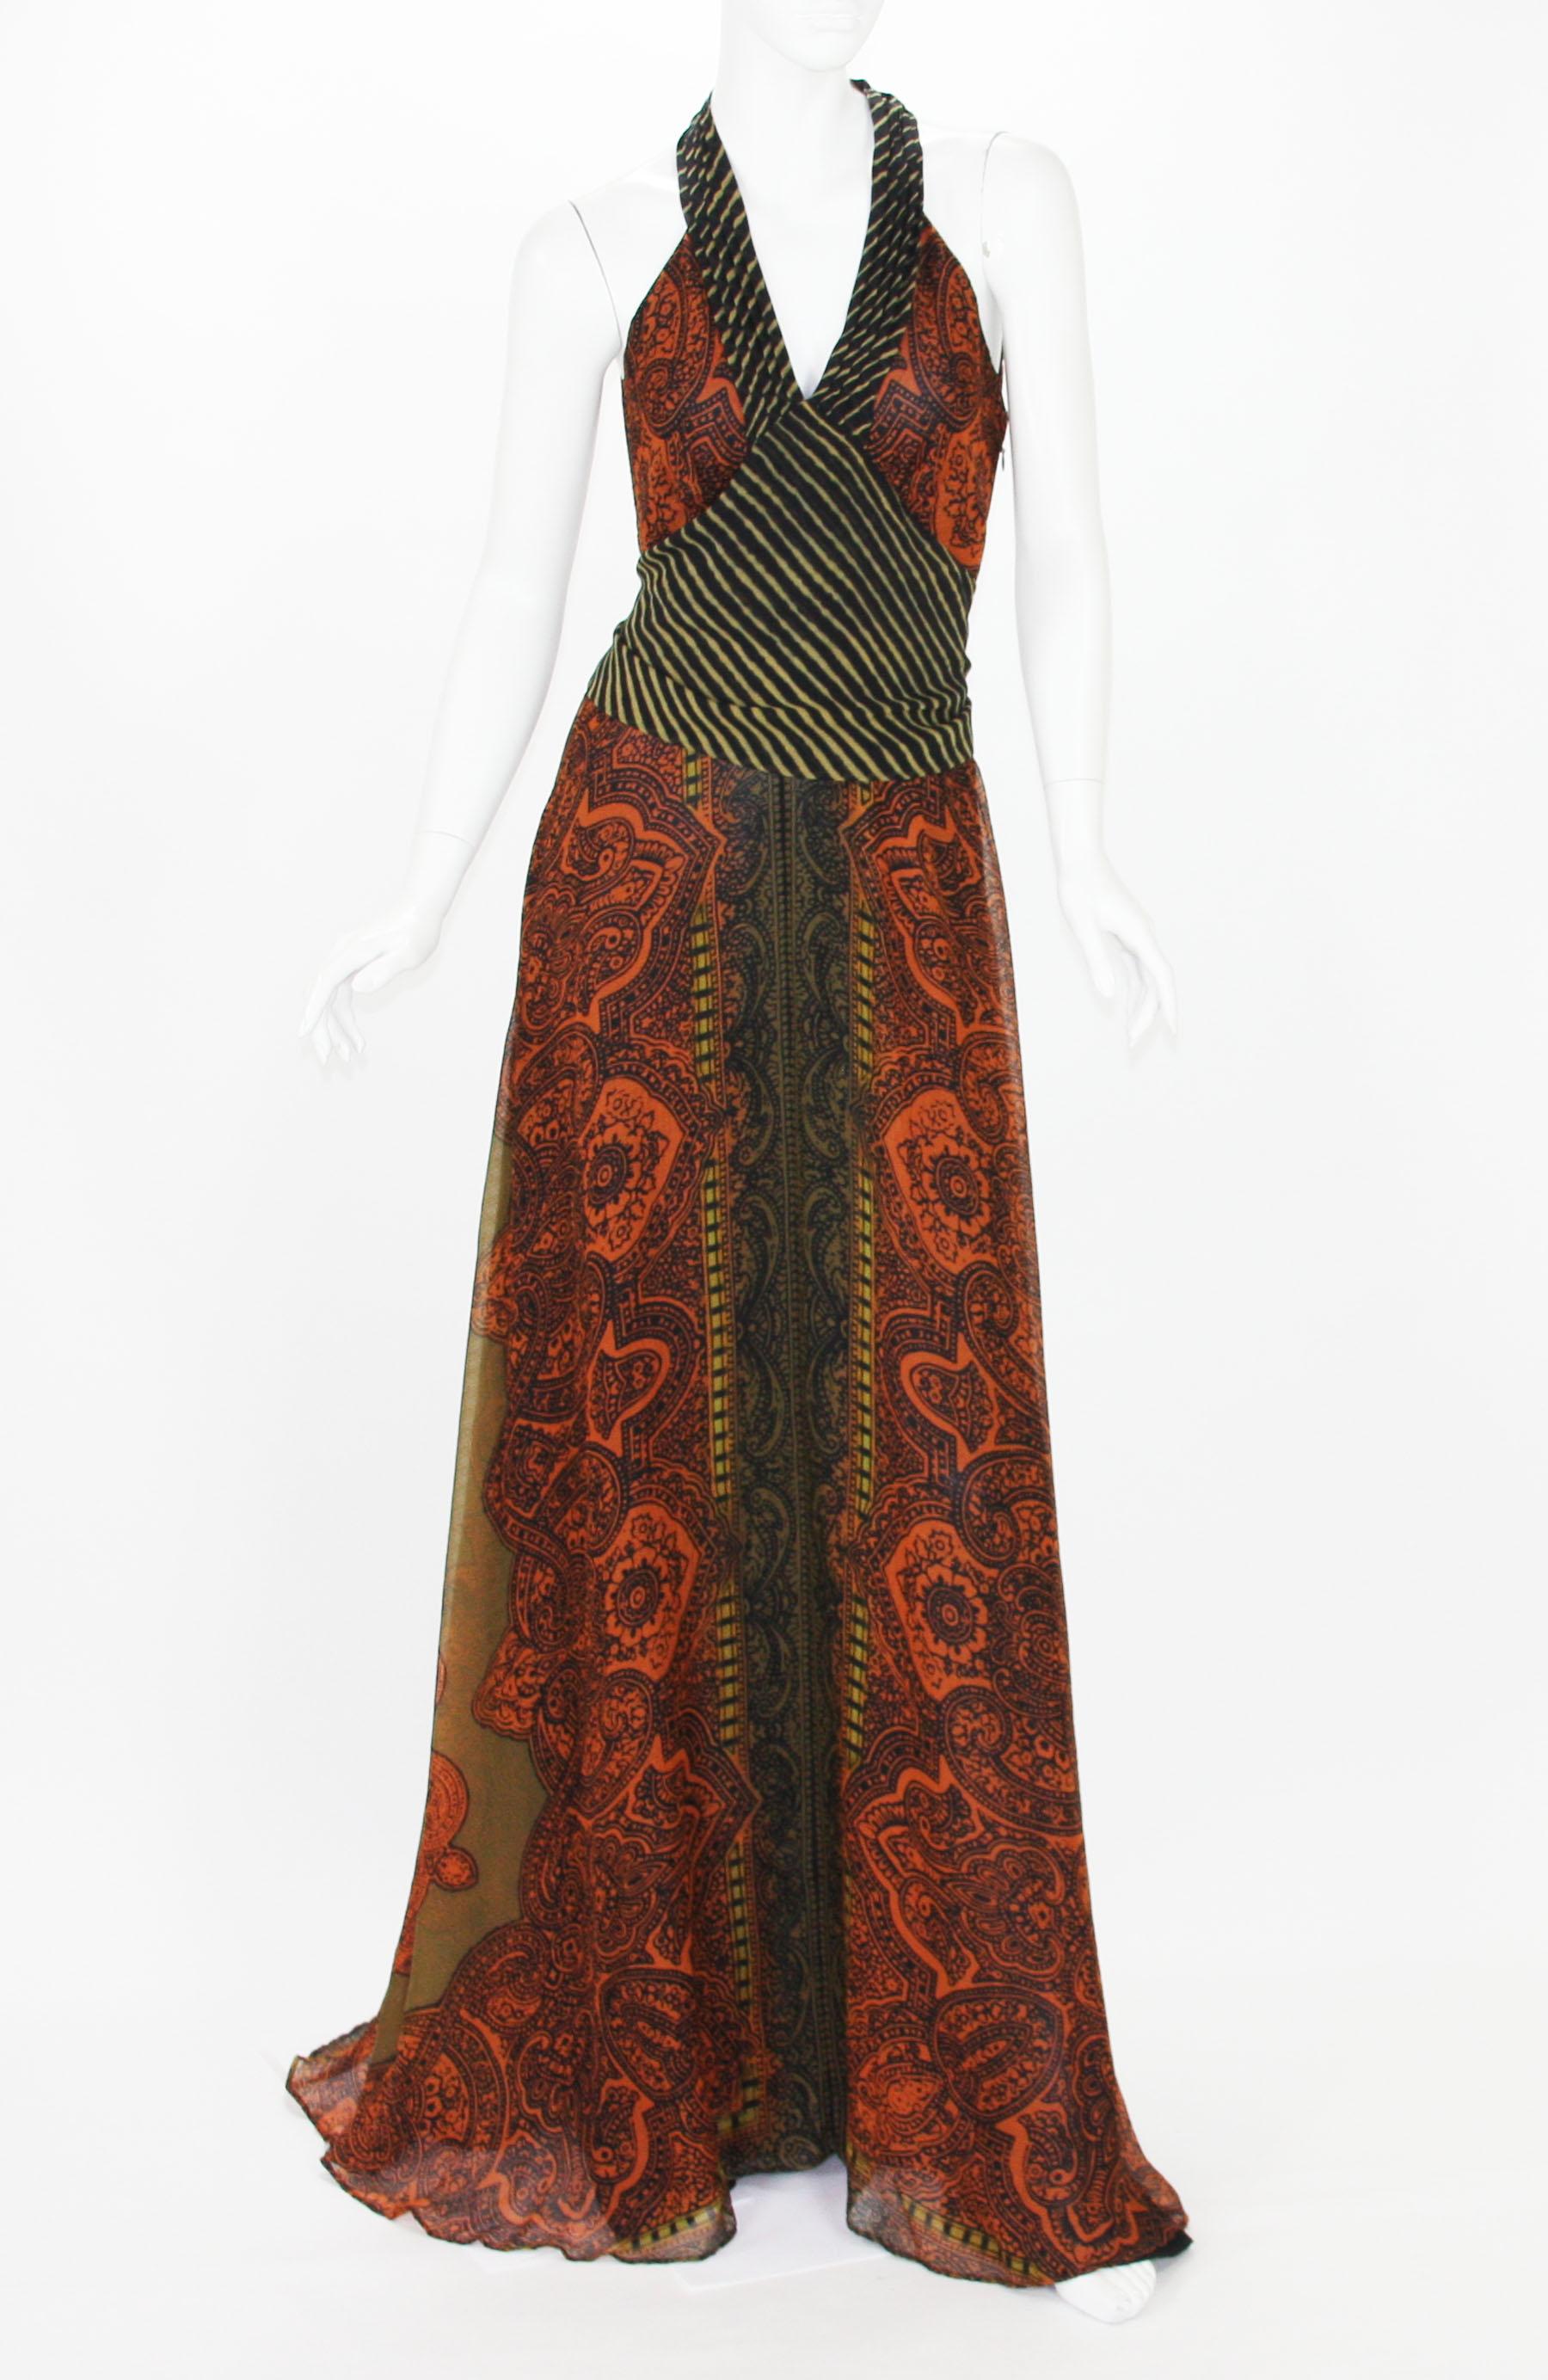 New Etro Silk Paisley Long Dress with Belt
Designer size 42
100% Silk, Famous Etro Paisley Print, Orange and Black Colors, Attached Belt, Side Zip Closure, Fully Lined in Black Silk. 
Measurements approx. : Length - 67 inches, Bust - 32 inches,